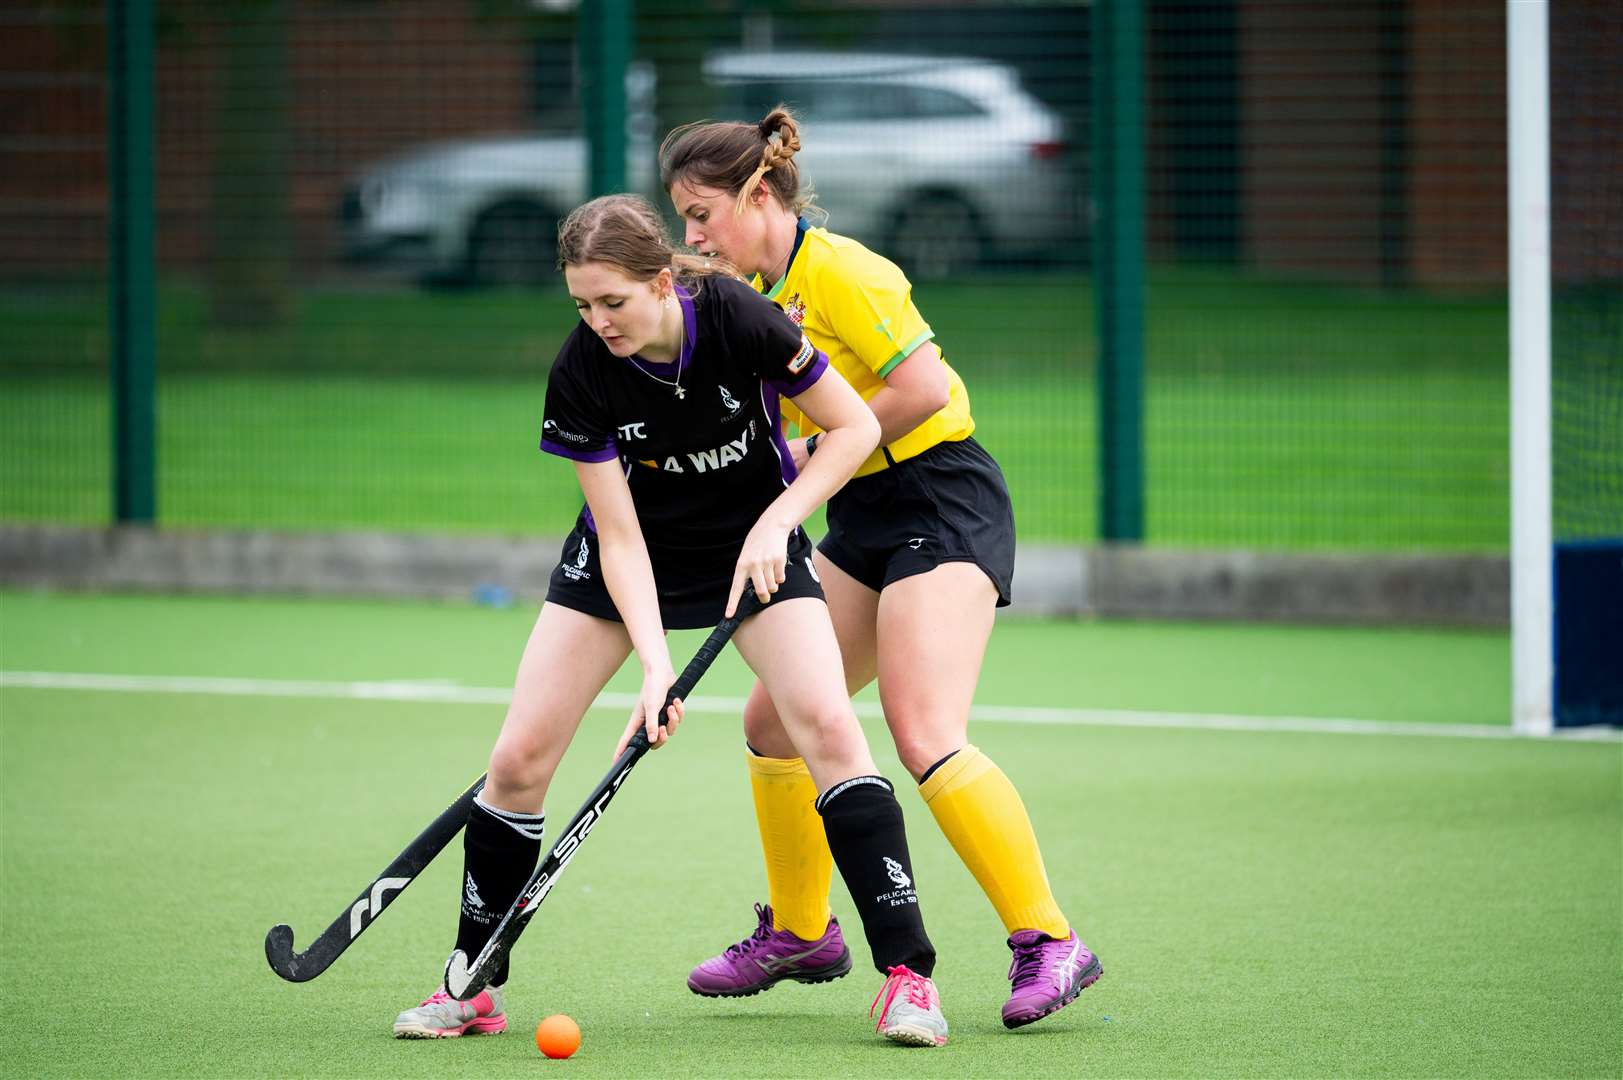 Action between Pelicans Ladies 2nds and Cambridge South at Alive Lynnsport. Picture: Ian Burt